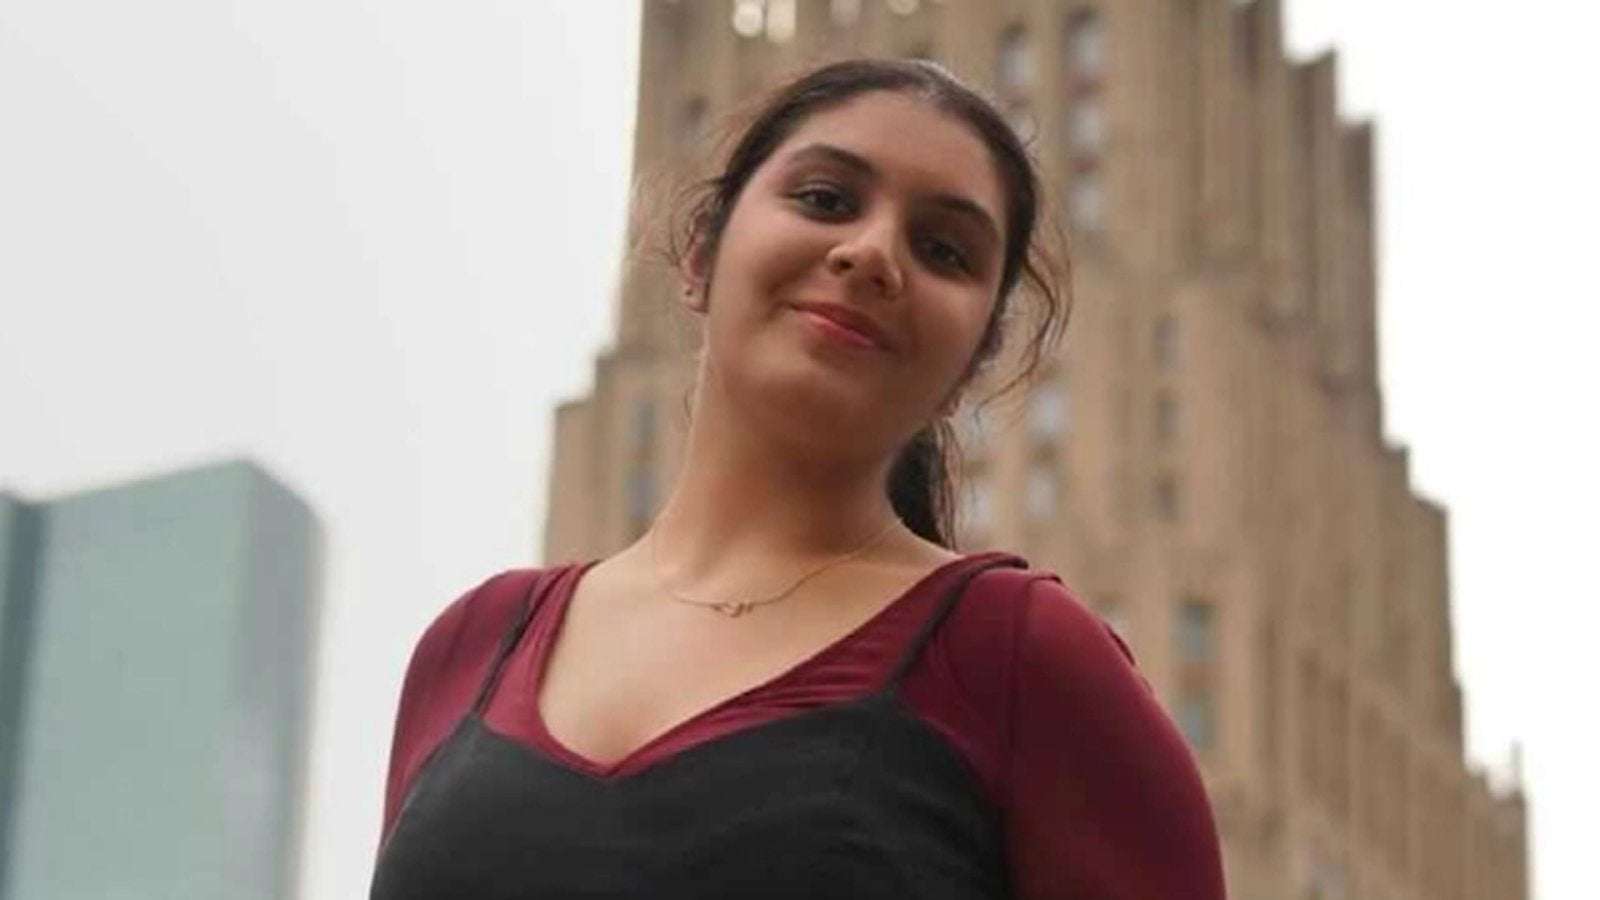 image for Astroworld victim Bharti Shahani dies nearly a week after crowd surge that killed 8 others